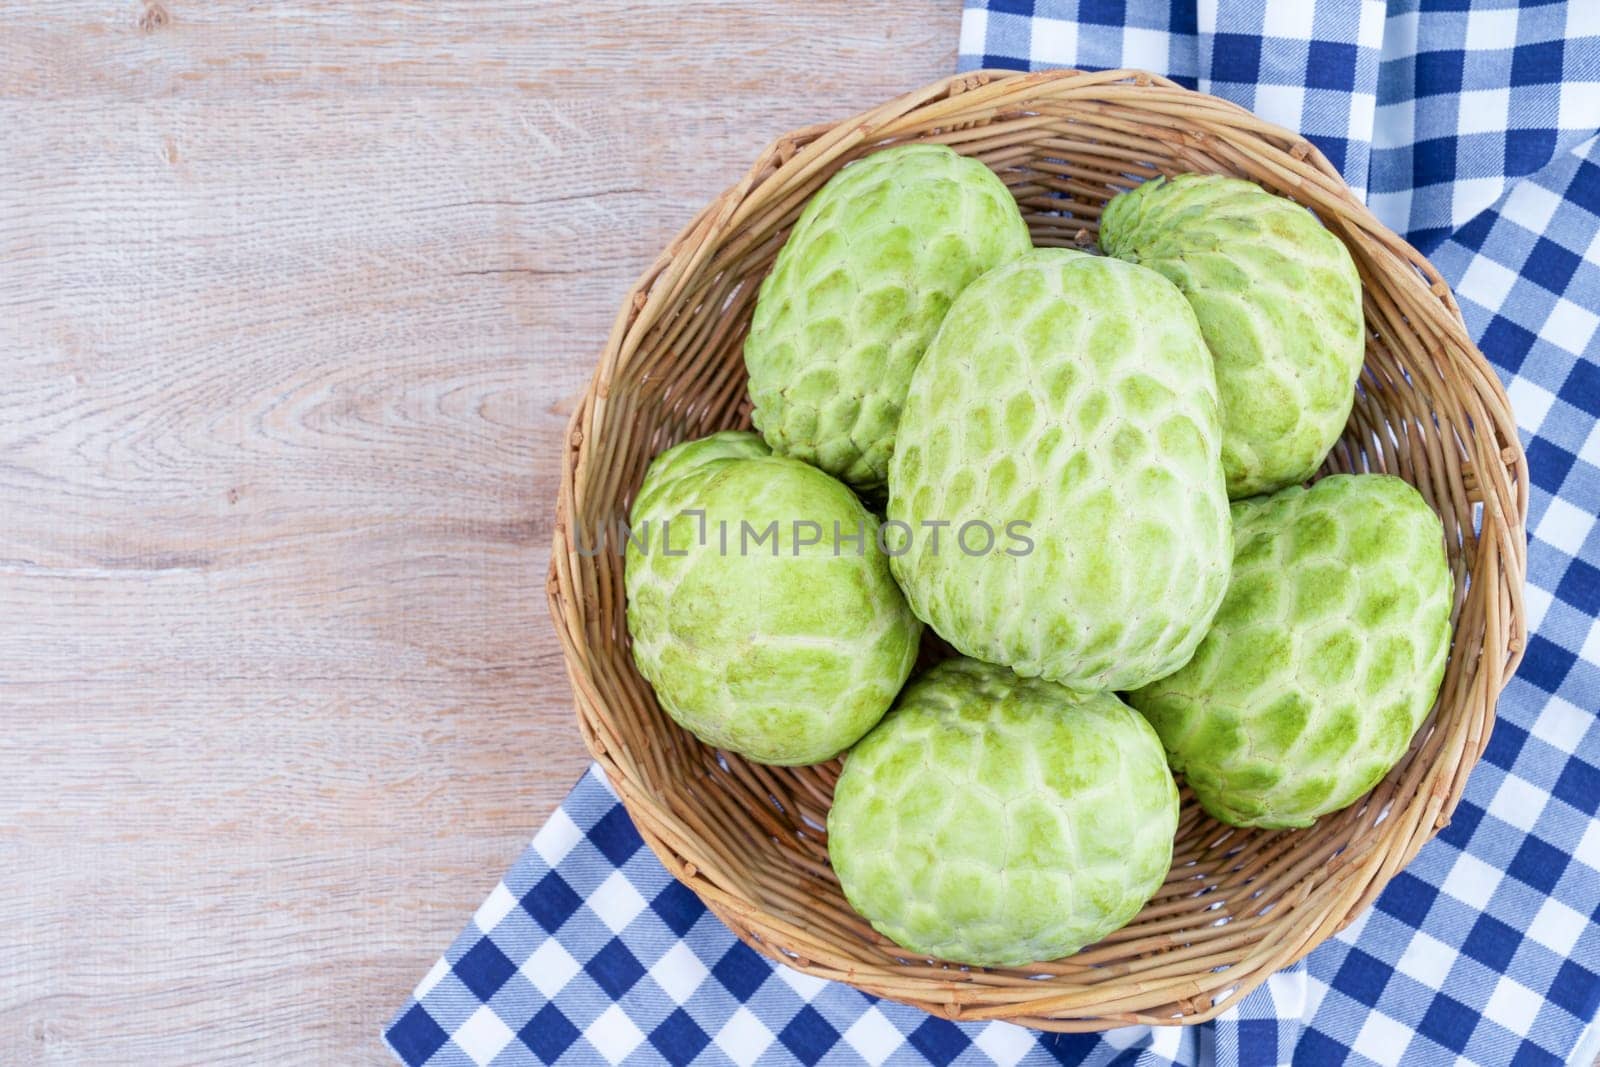 Sugar apples or custard apples in a wooden weave basket on wooden table.